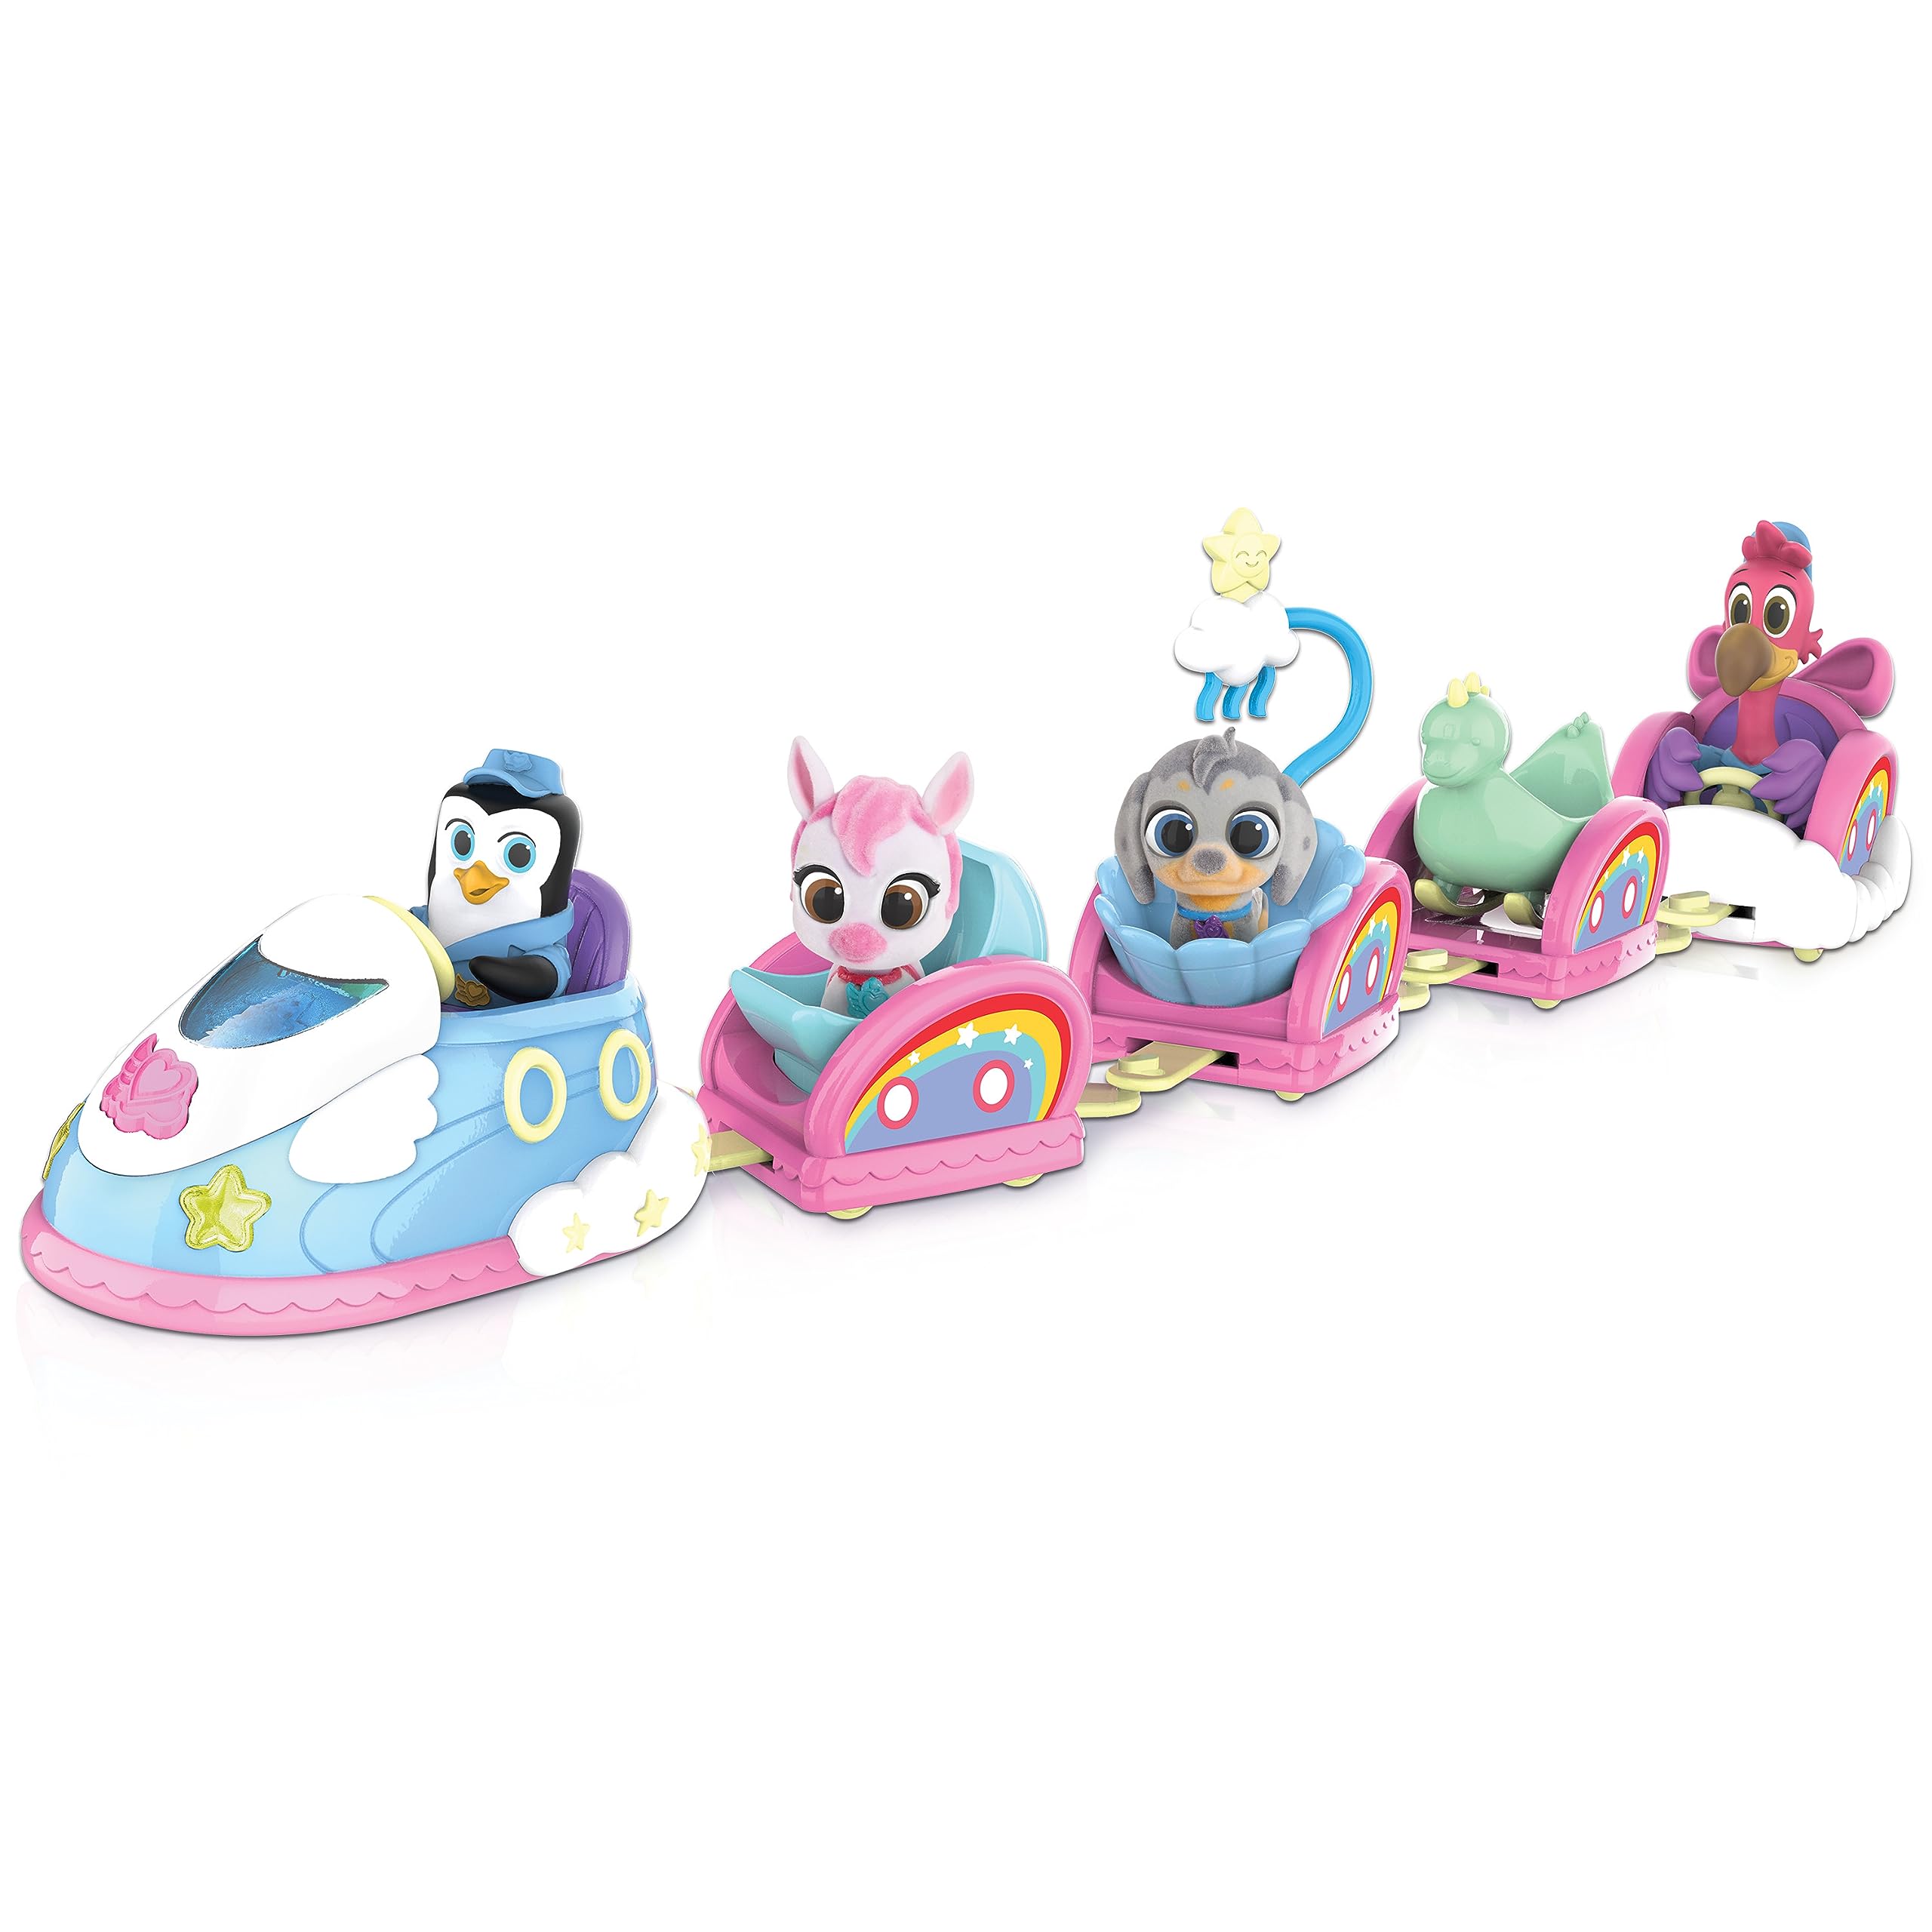 Disney Jr T.O.T.S. Chugga Chugga Choo-Choo Playset, Officially Licensed Kids Toys for Ages 3 Up, Gifts and Presents by Just Play